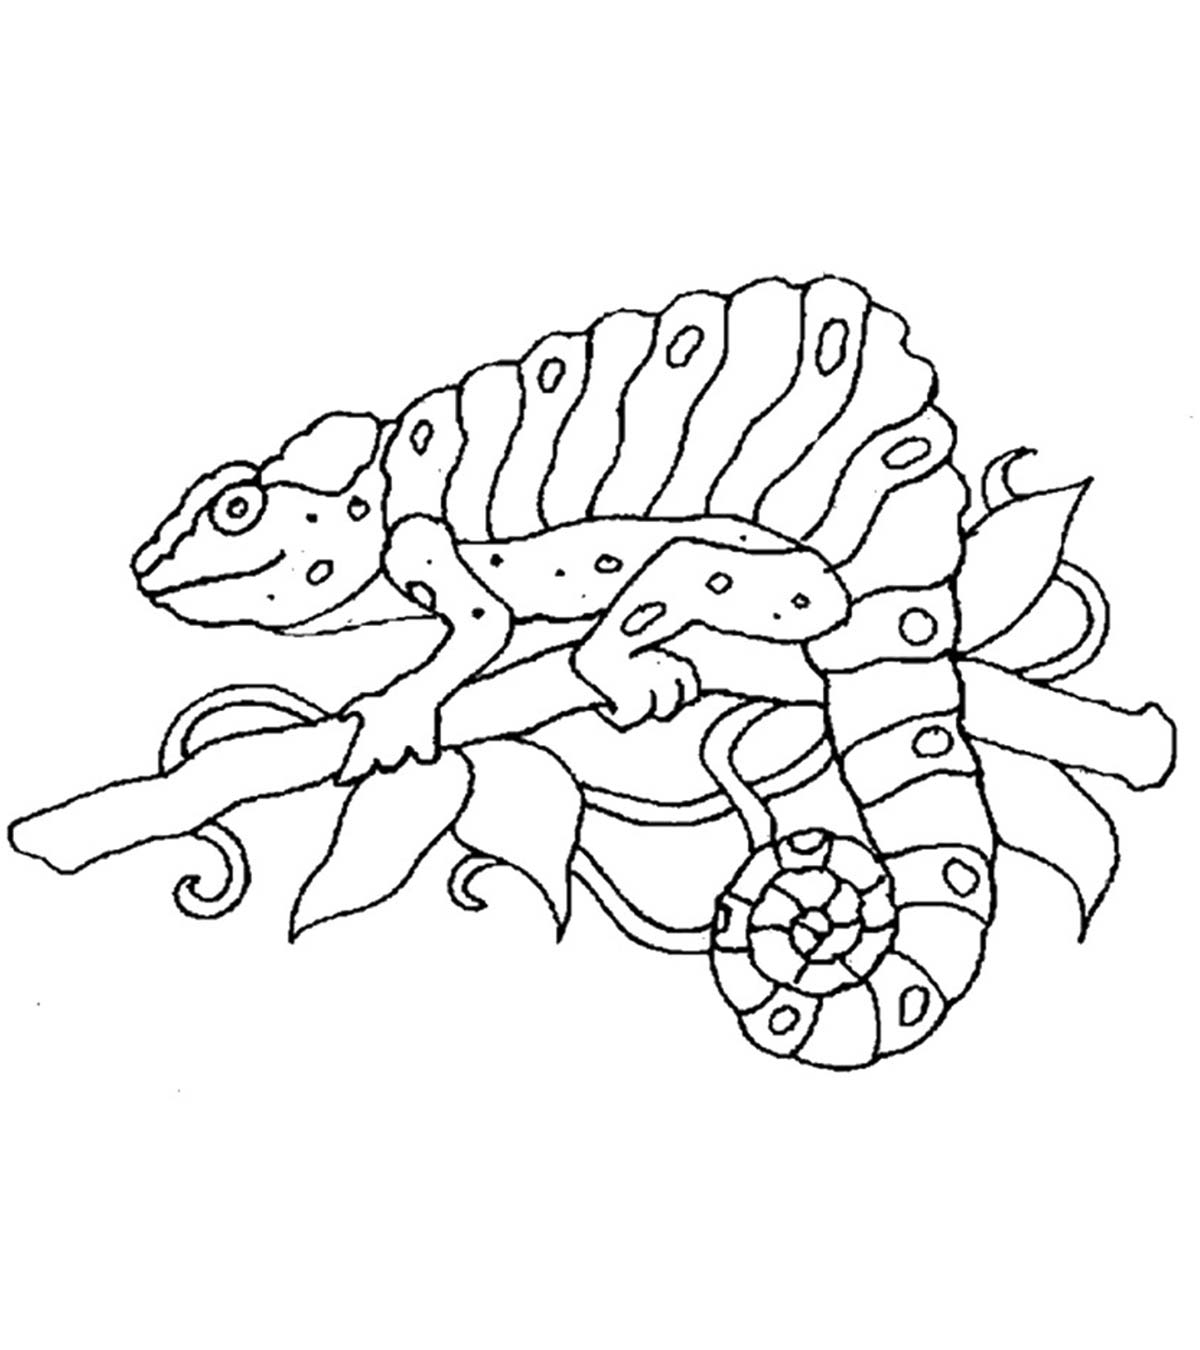 Animal Coloring Pages - MomJunction